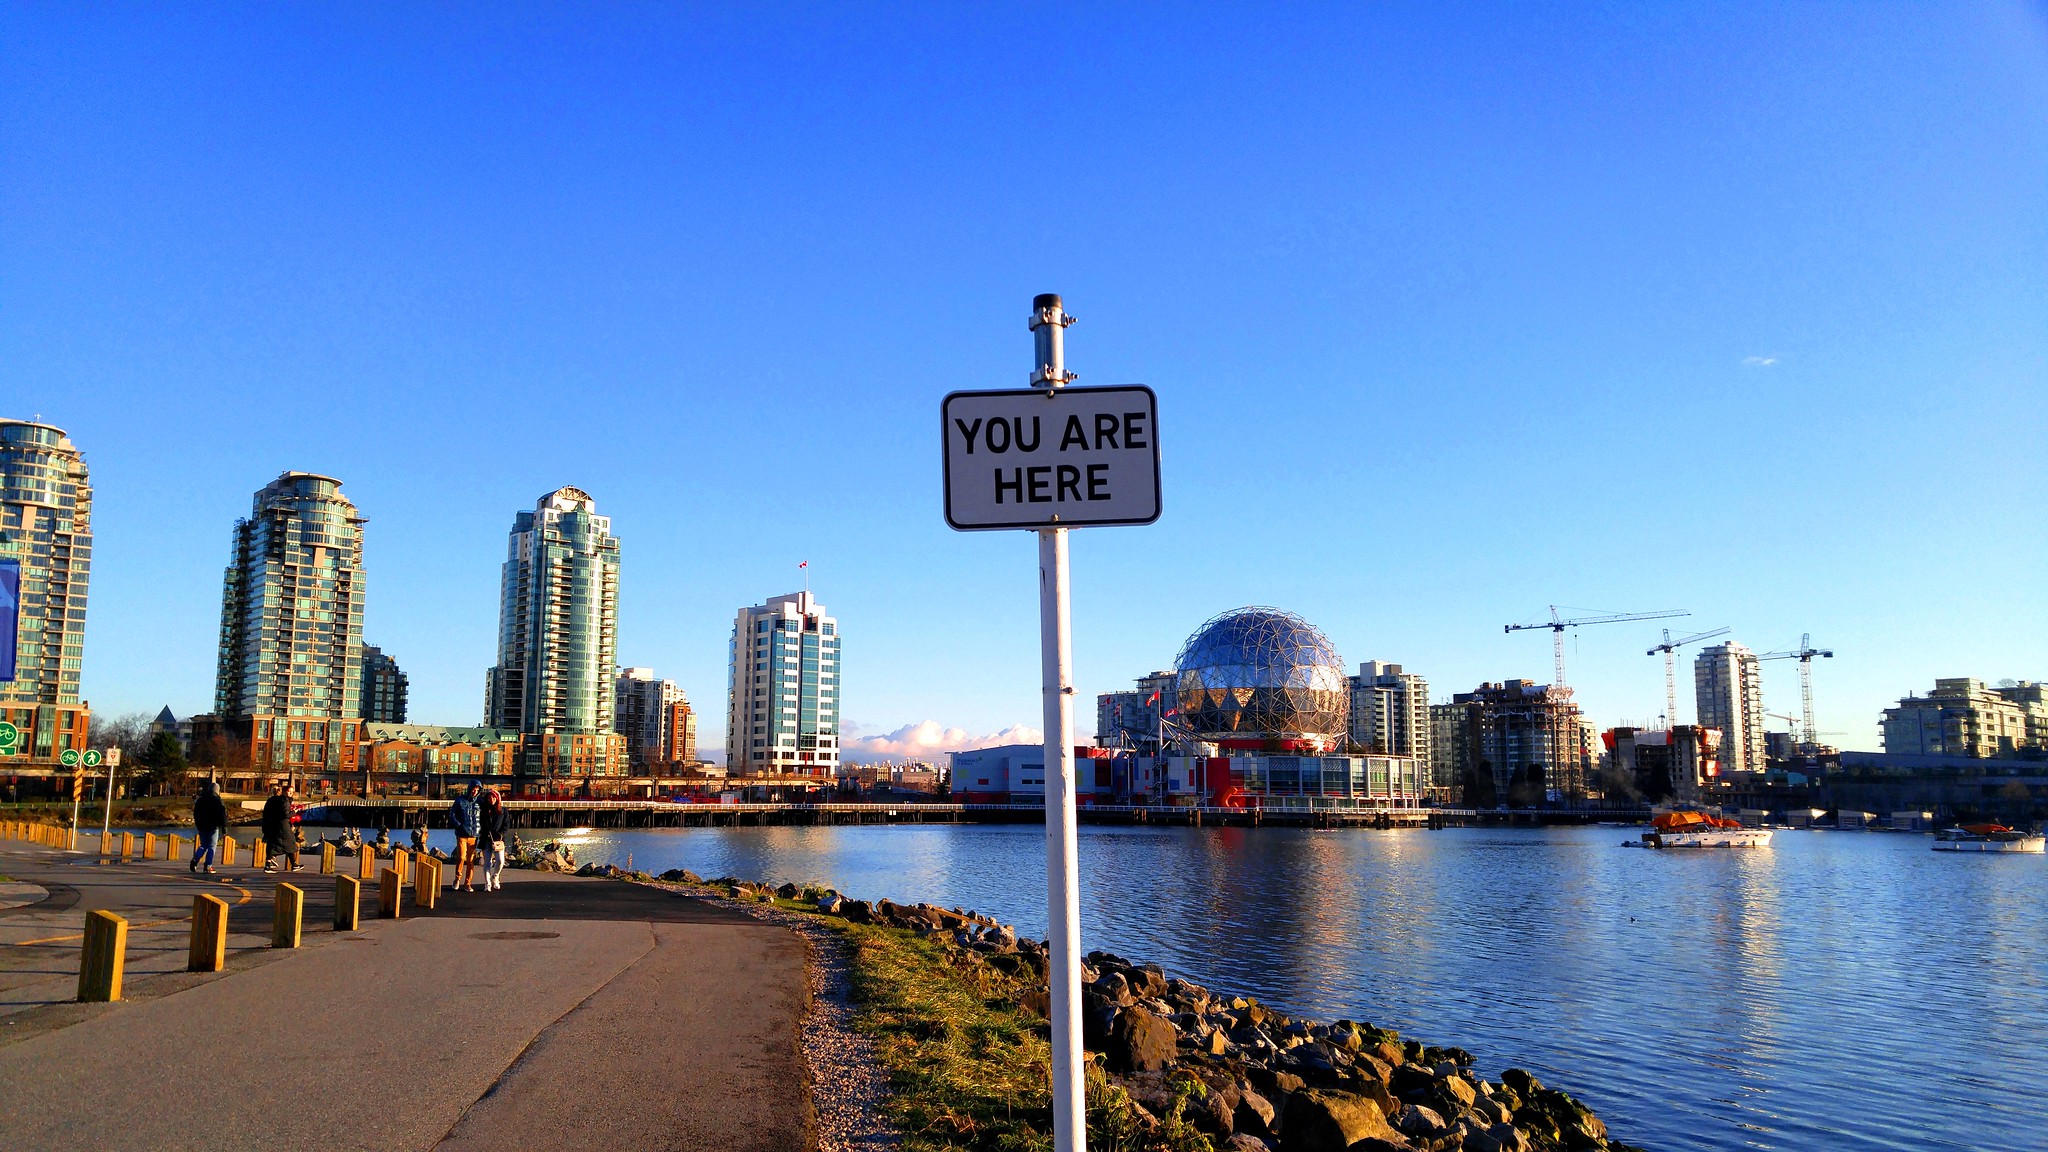 Image of a sign saying "You are here" along a path with downtown Vancouver BC in the background